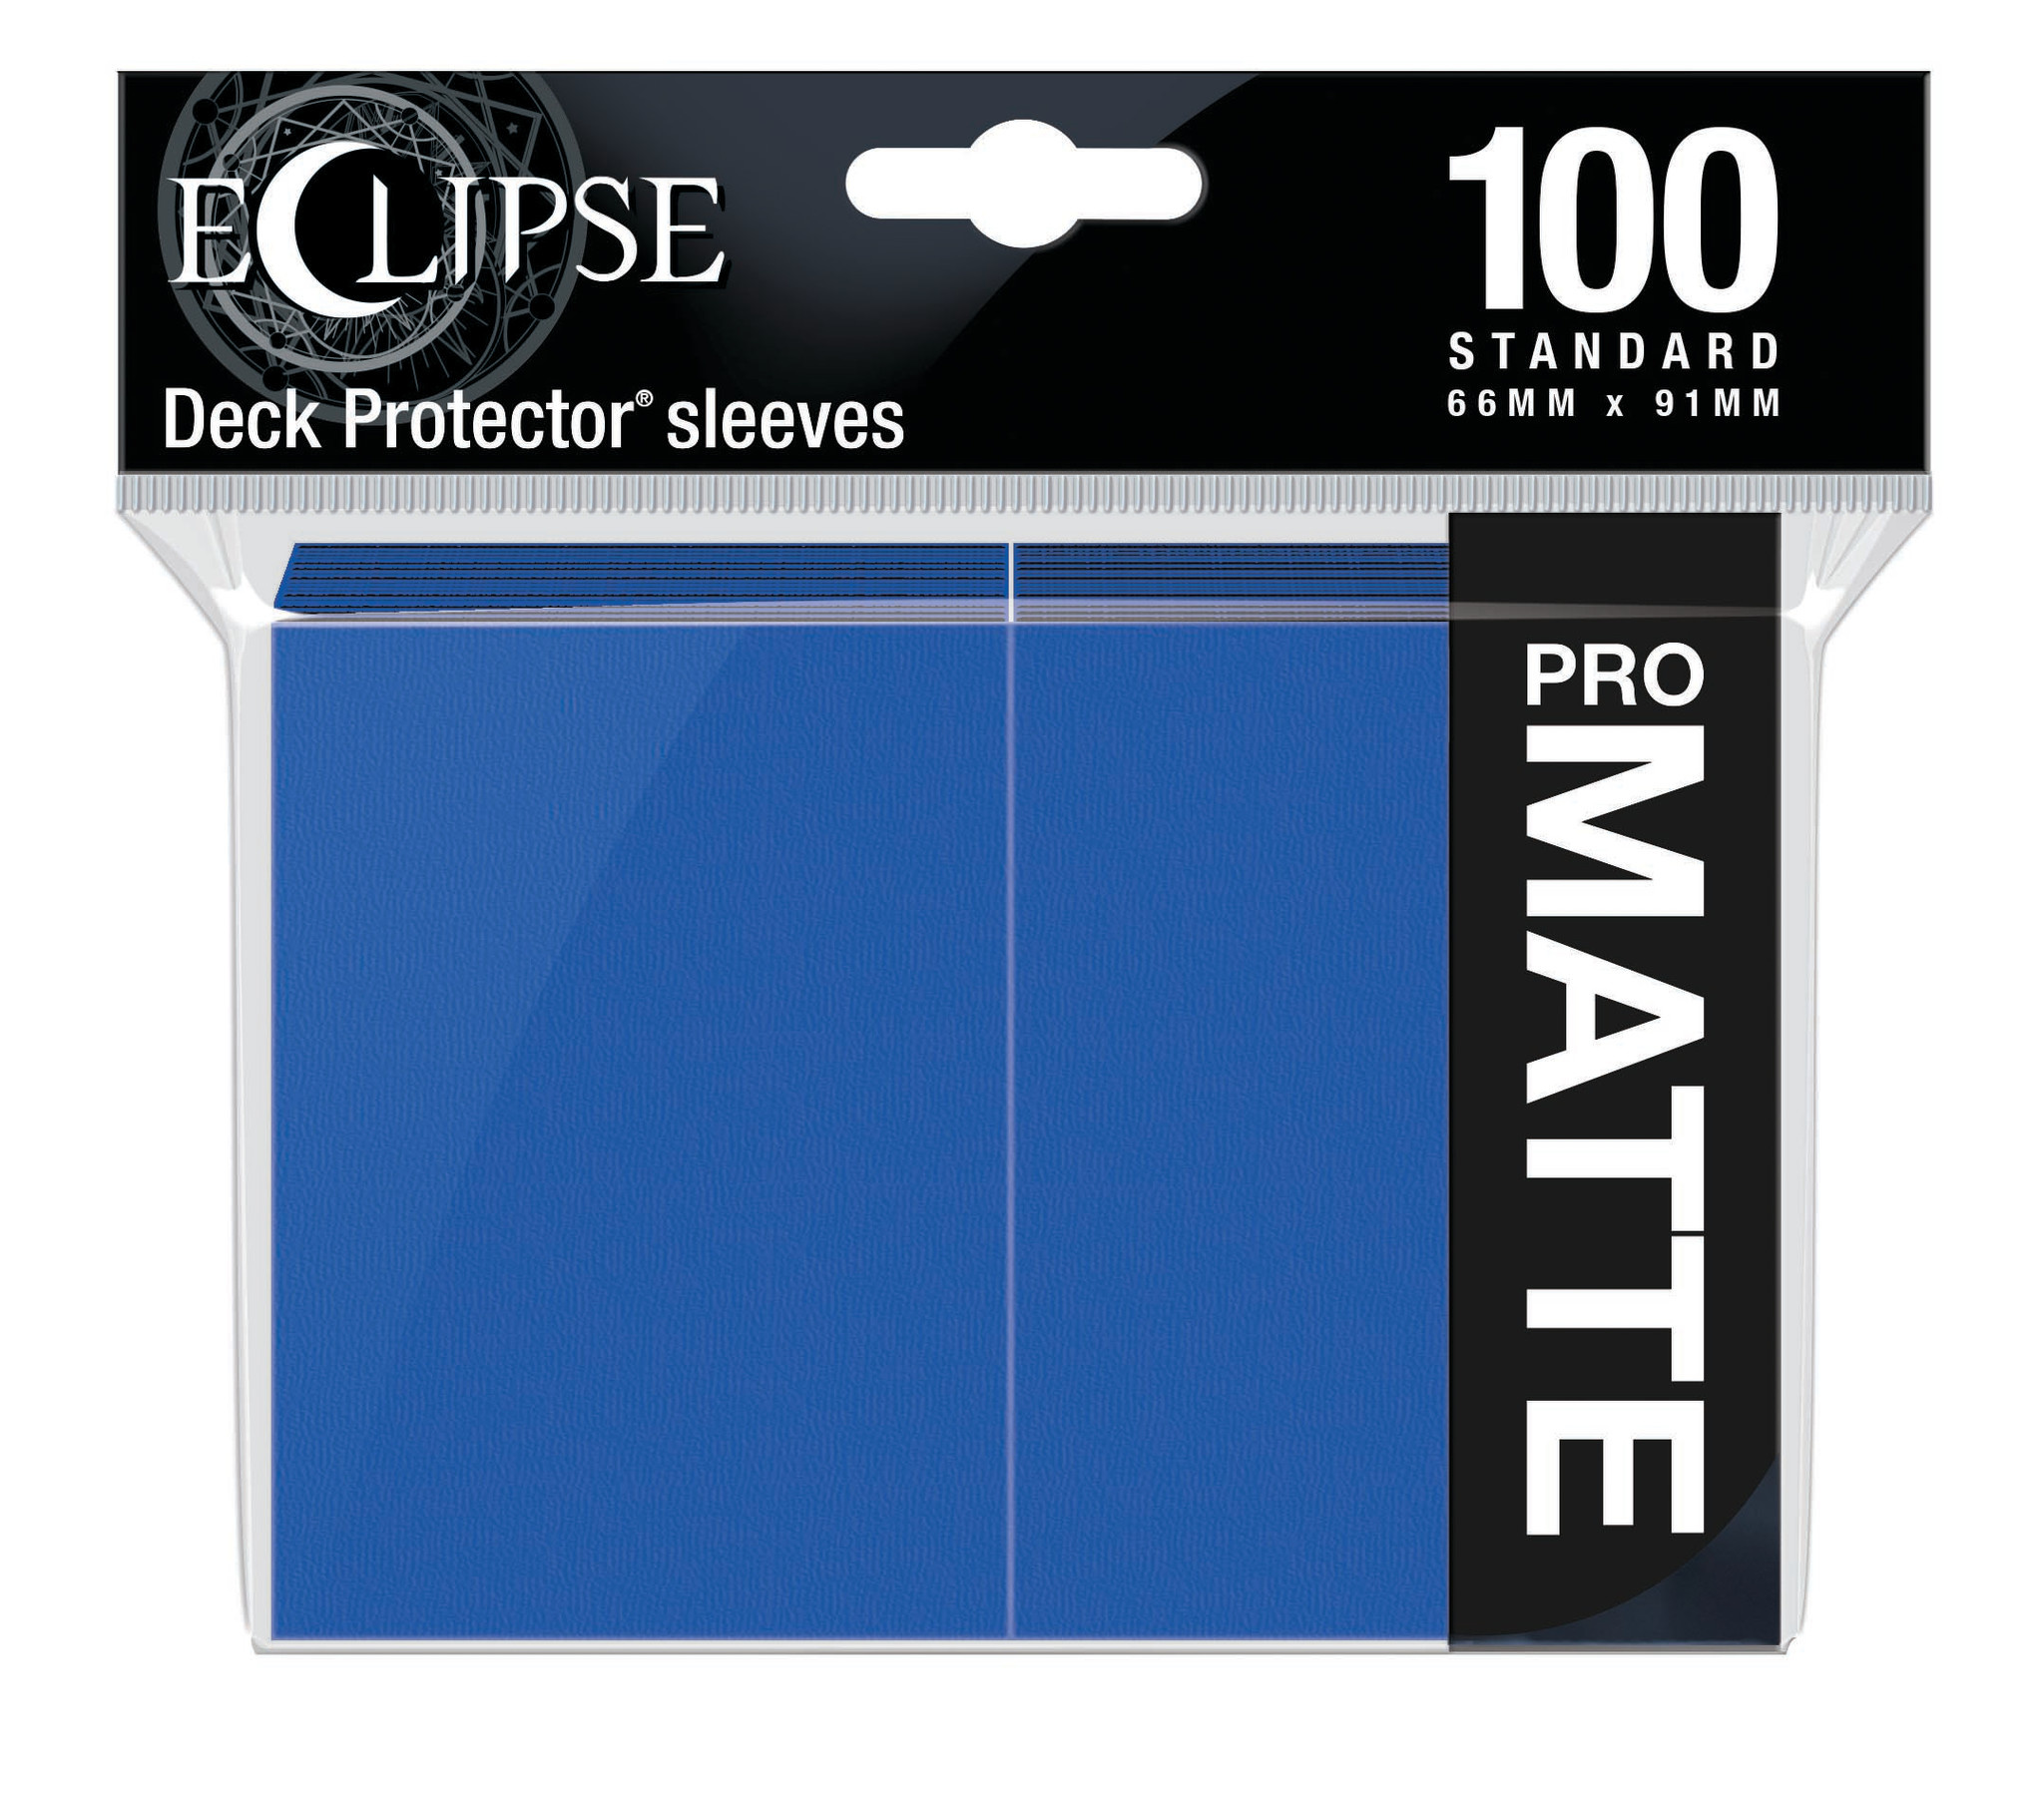 Ultra Pro - 66mm X 91mm - Eclipse Matte Sleeves - Pacific Blue 100 ct.